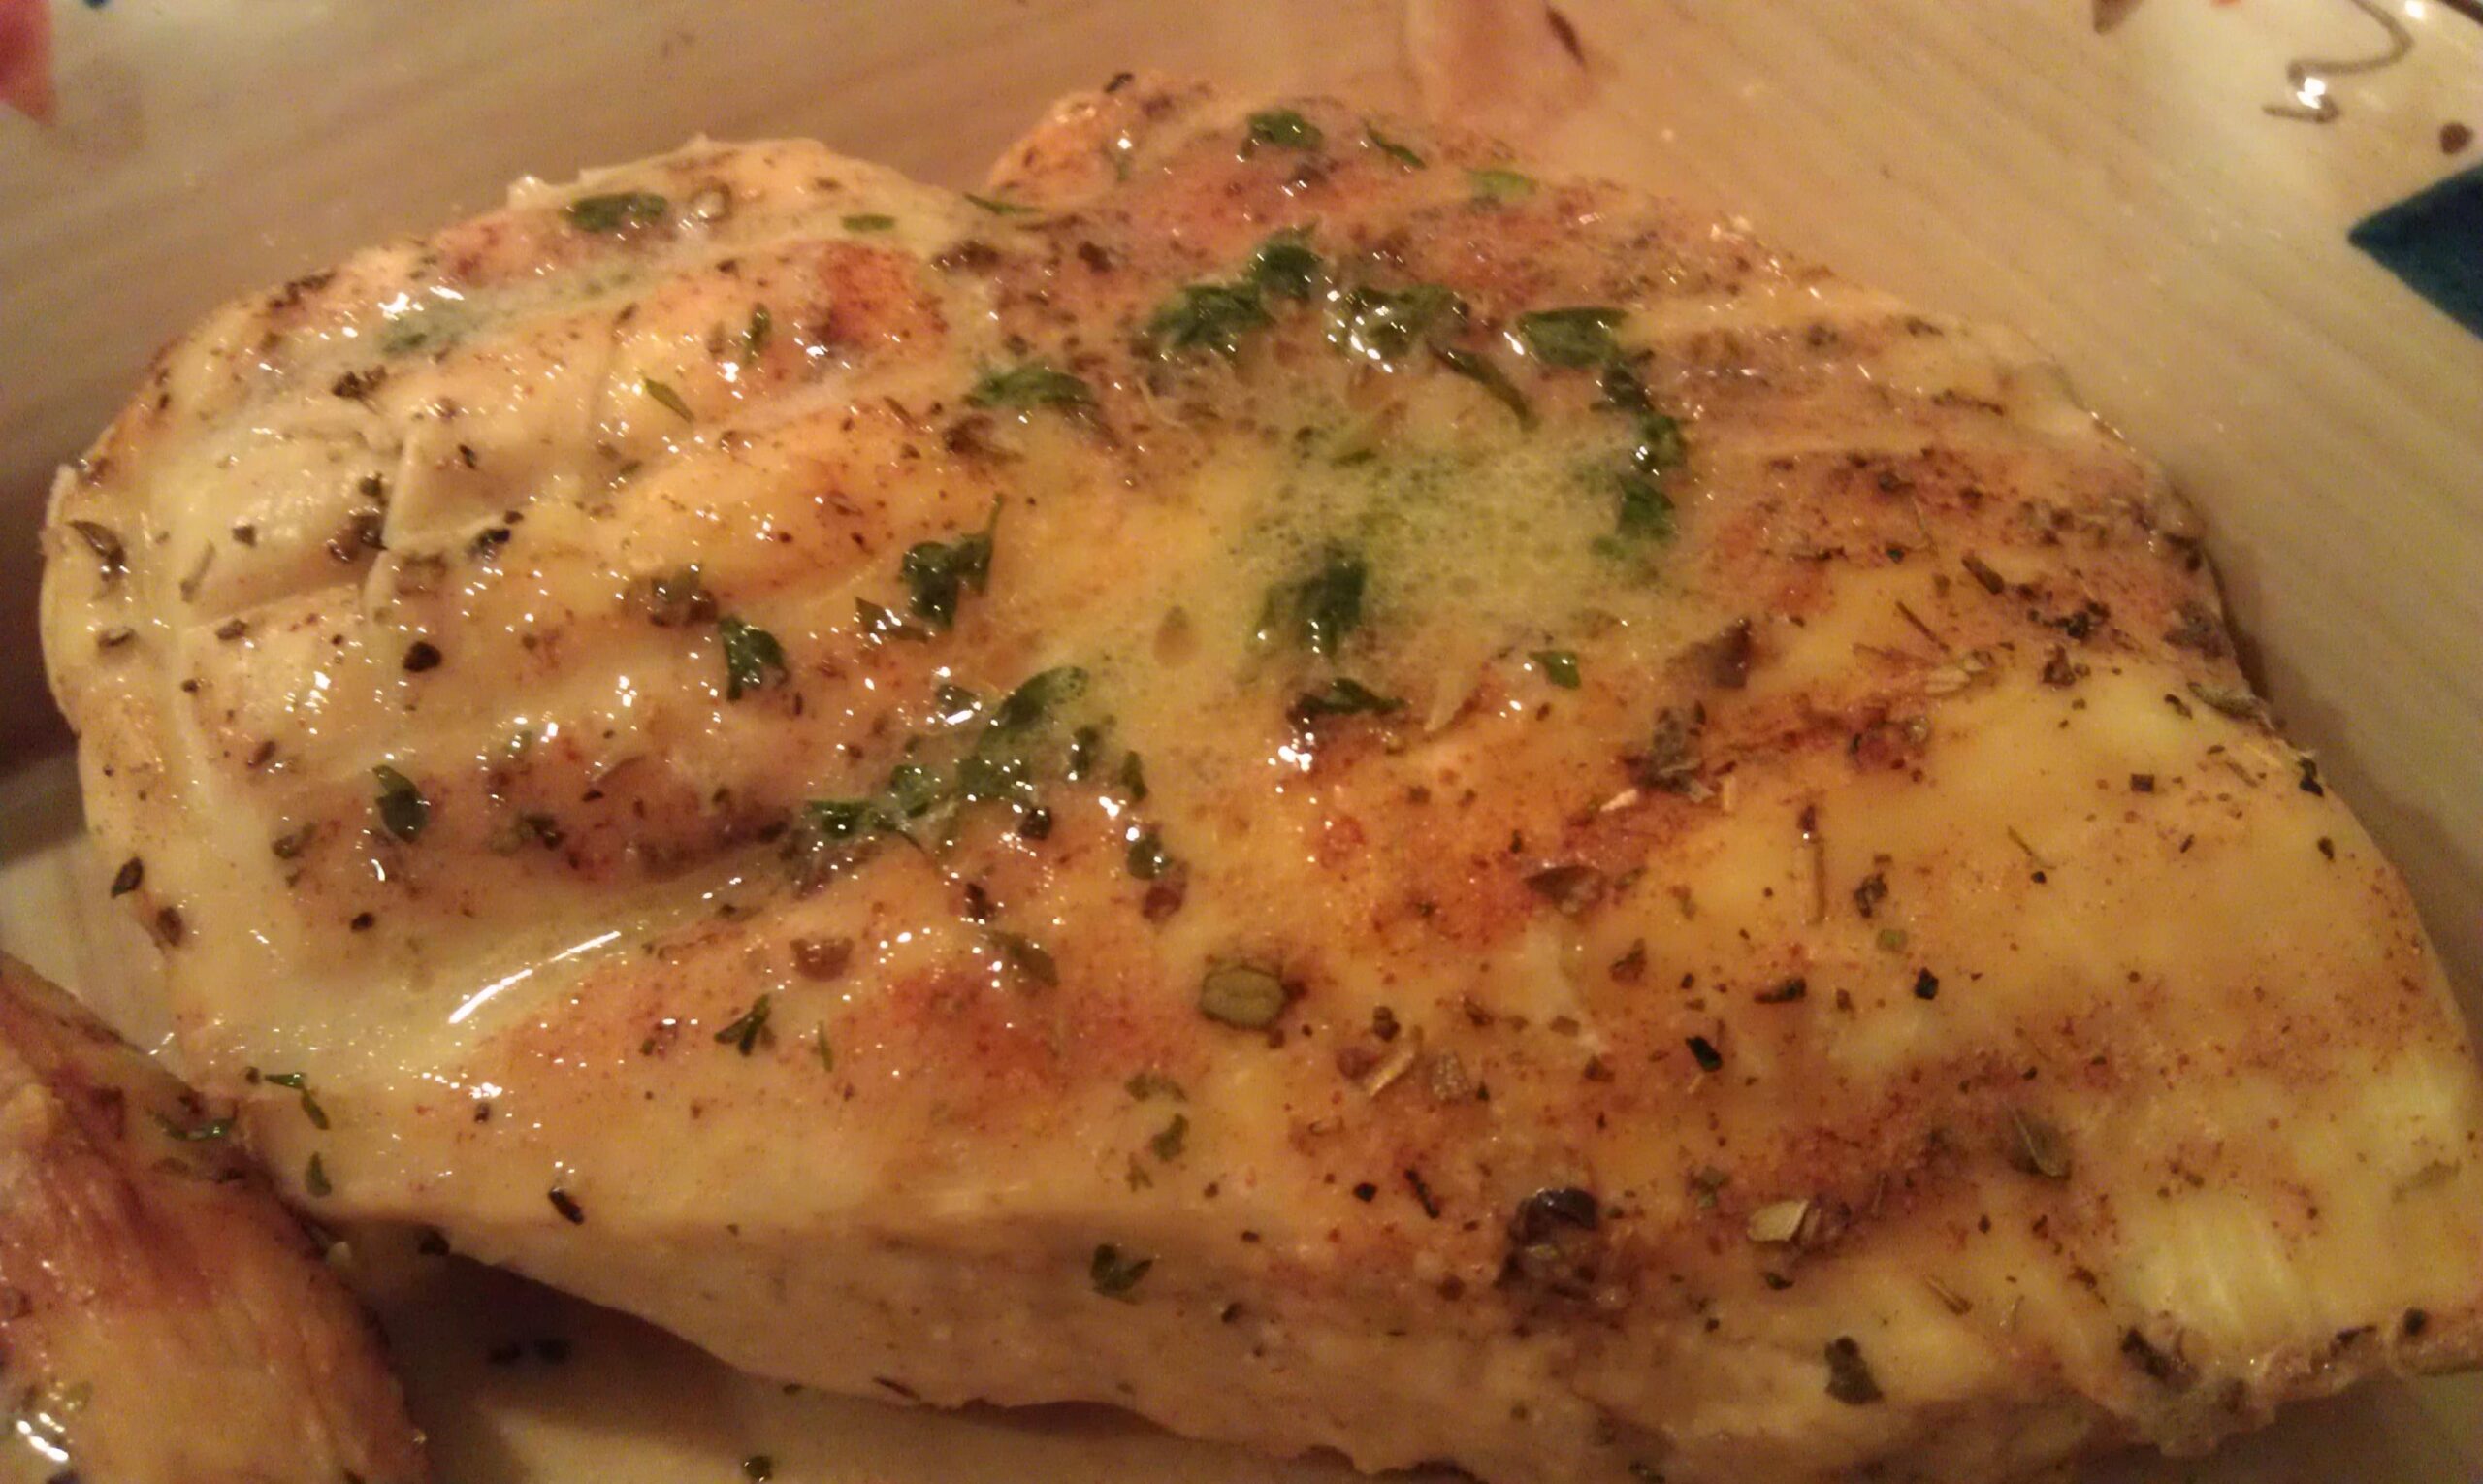  Tender Chicken Breasts: The chicken breasts are marinated to perfection, leaving them juicy and tender.